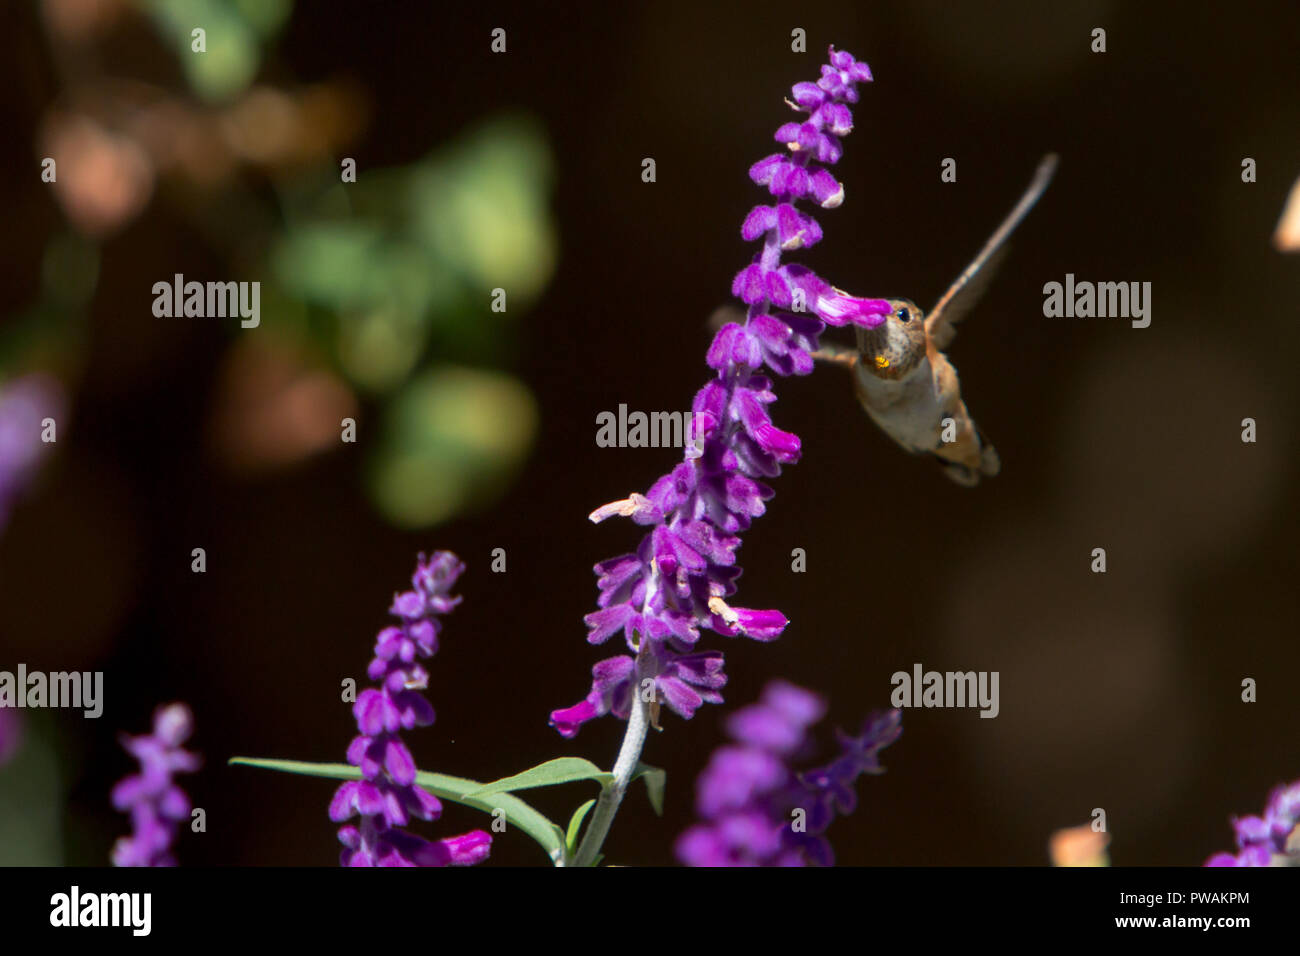 Allen's hummingbird feeding on the purple flowers of a Mexican Sage in a back yard garden in suburban Los Angeles, California, USA Stock Photo